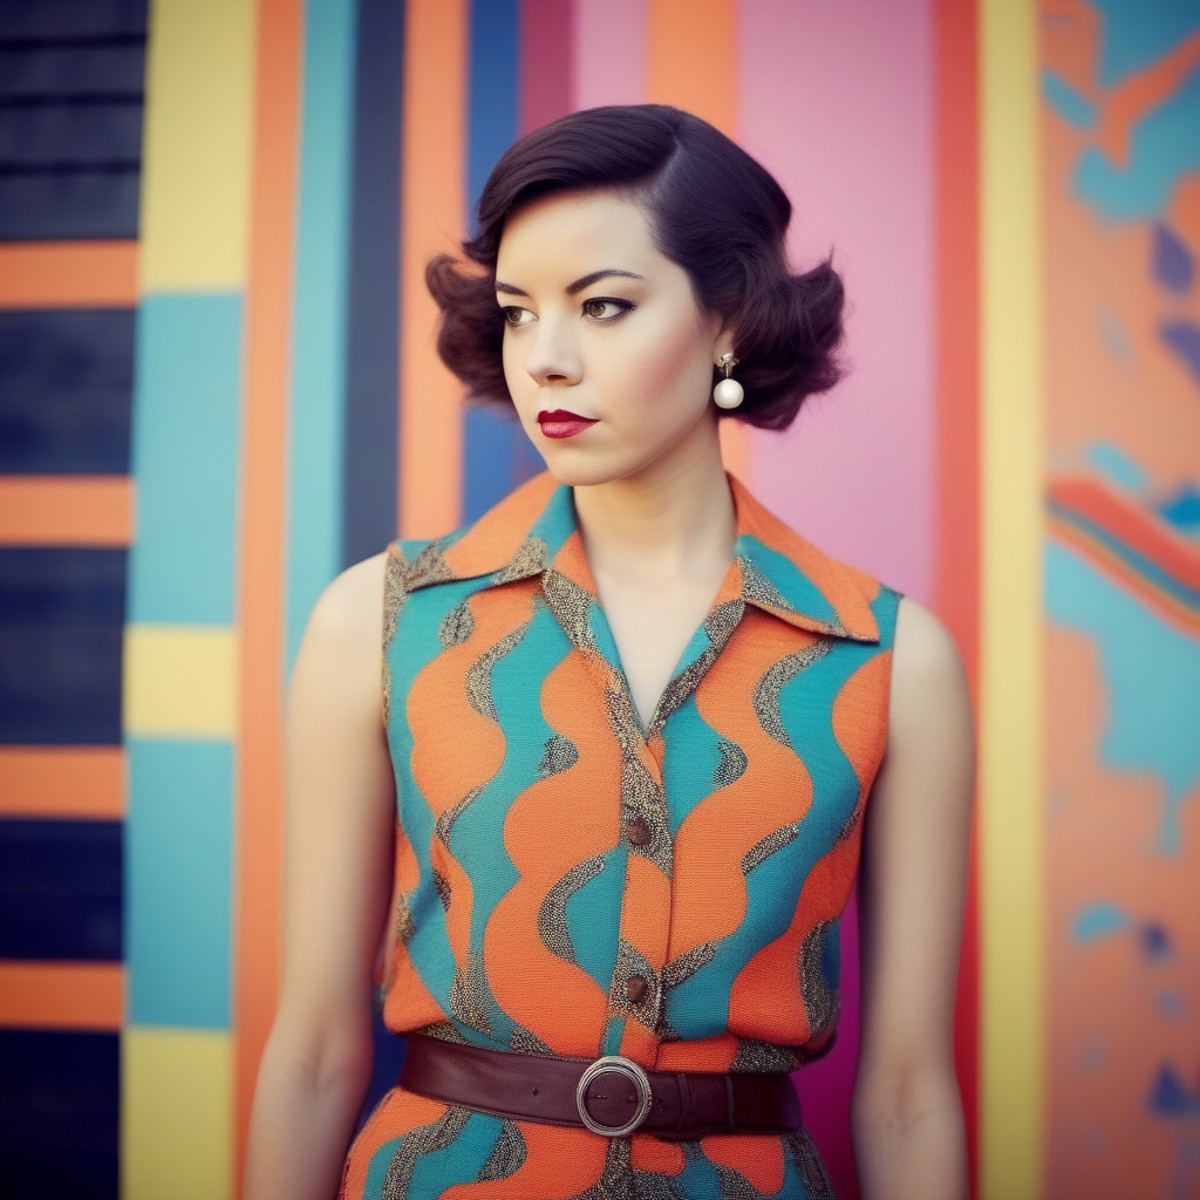 aubreyplaza A captivating image of a woman wearing a vintage-inspired outfit, reminiscent of the fifties or sixties. The w...